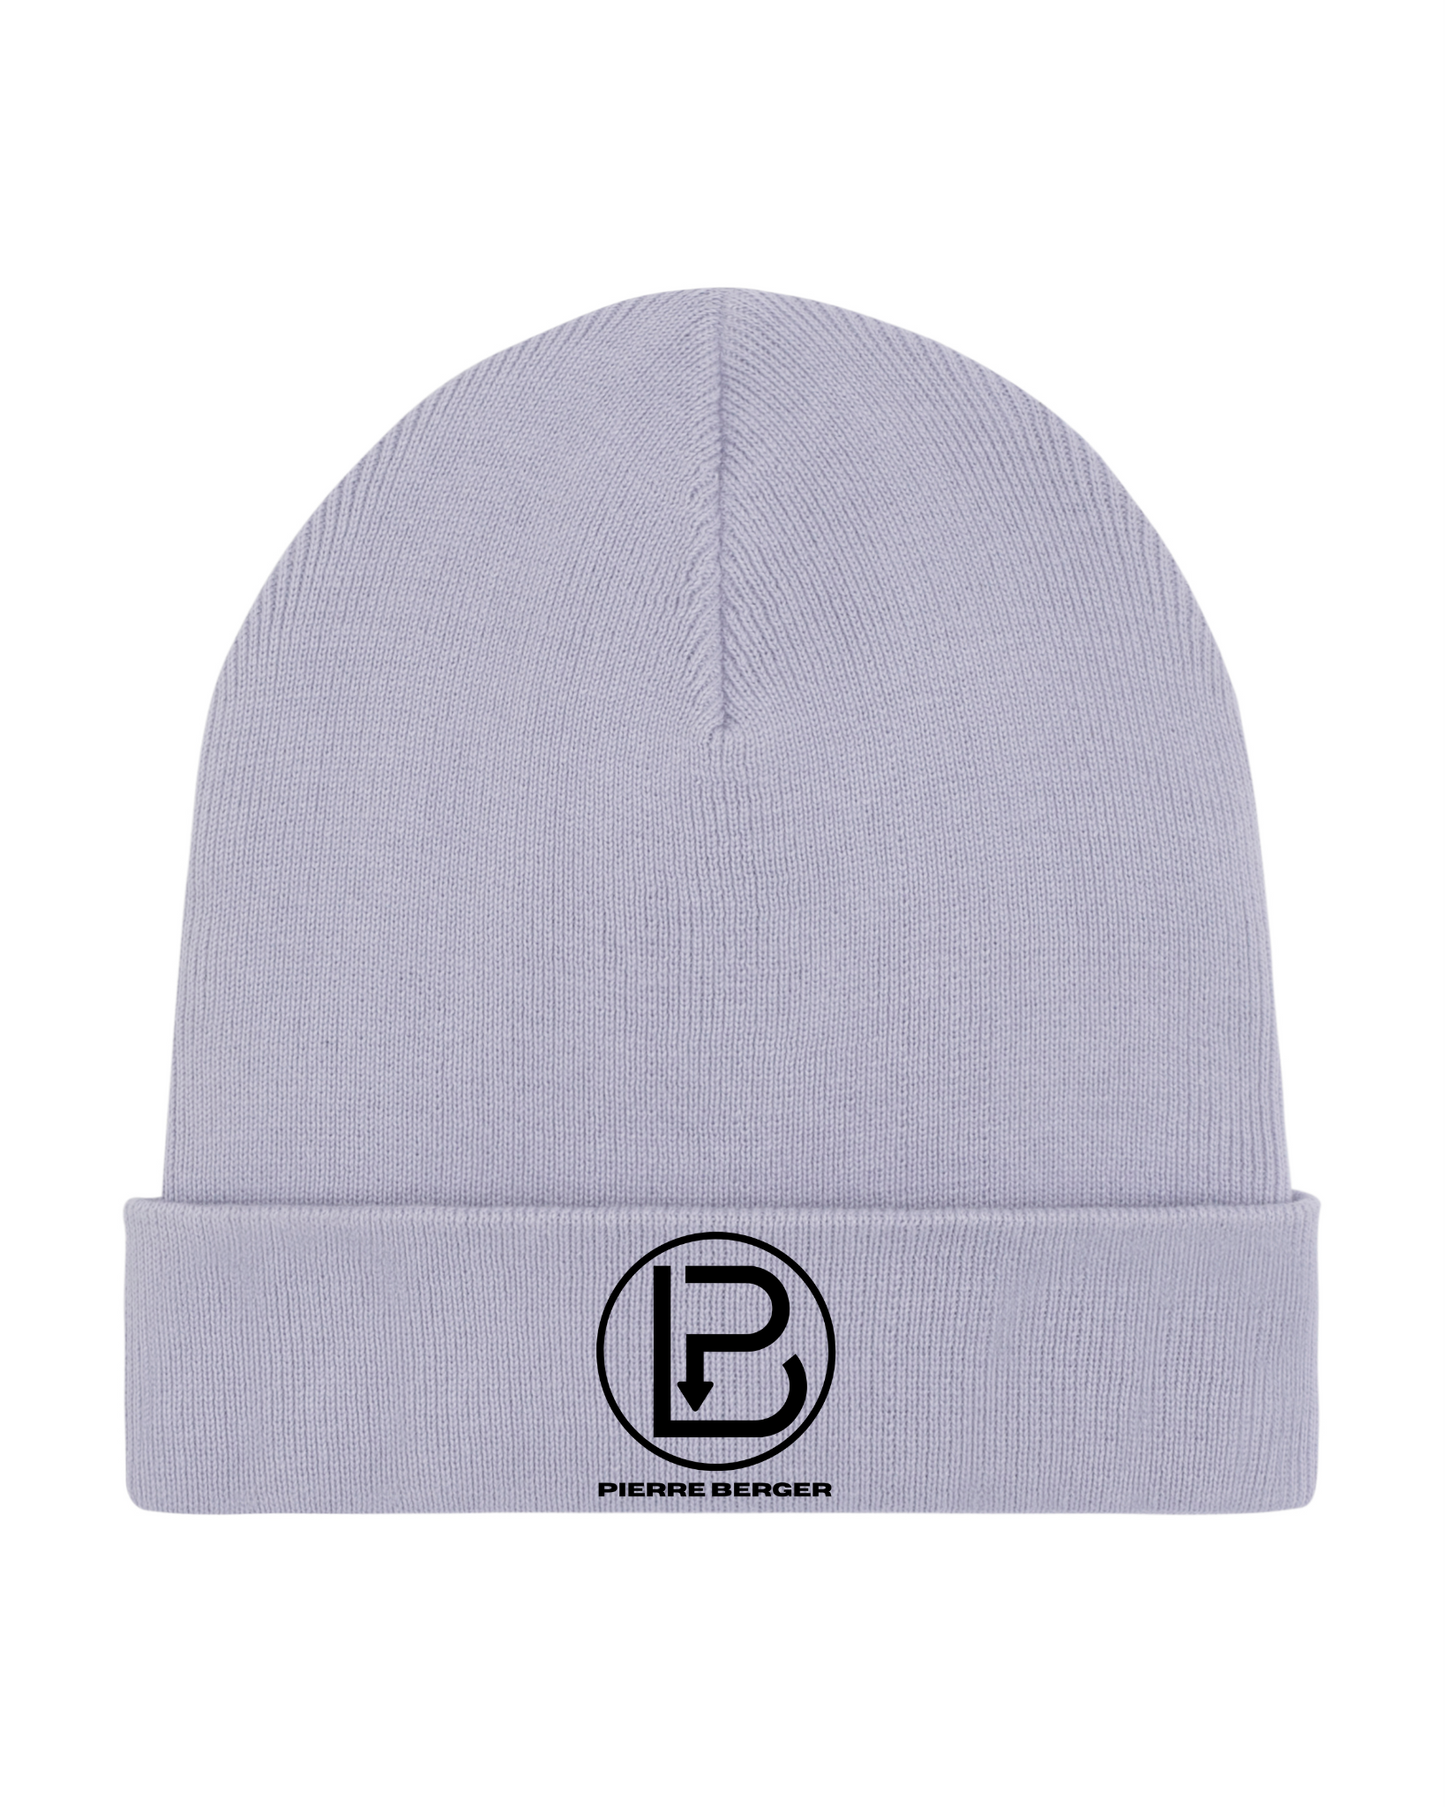 PIERRE BERGER - Knit Beanie 100% Recycled Stick